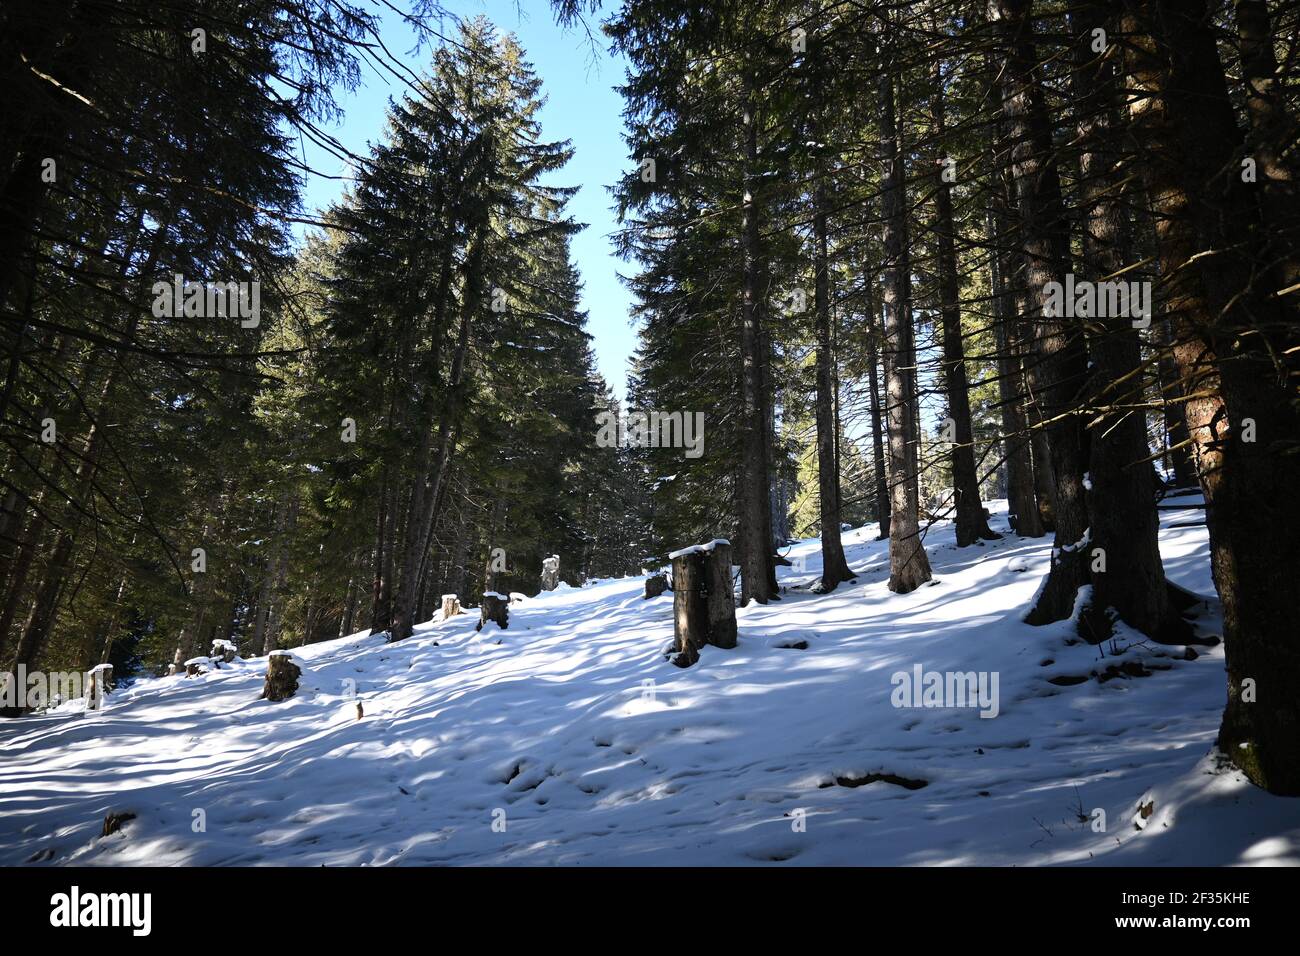 Snowy landscape with trees and tree trunks in the sun Stock Photo